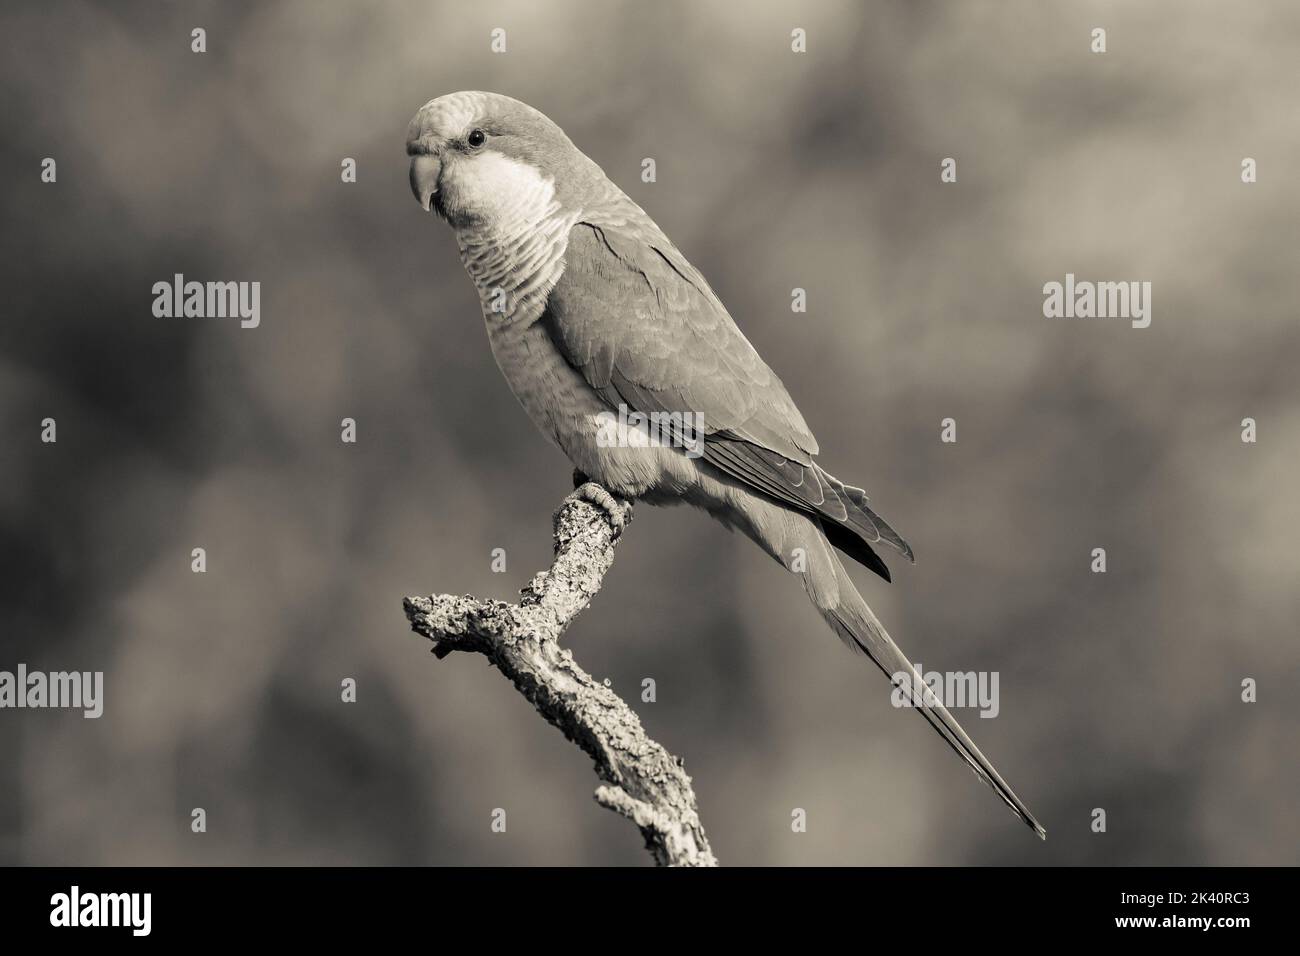 Monk parakeet, Myiopsitta monachus, in Pampas forest environment, La Pampa province, Patagonia, Argentina. Stock Photo